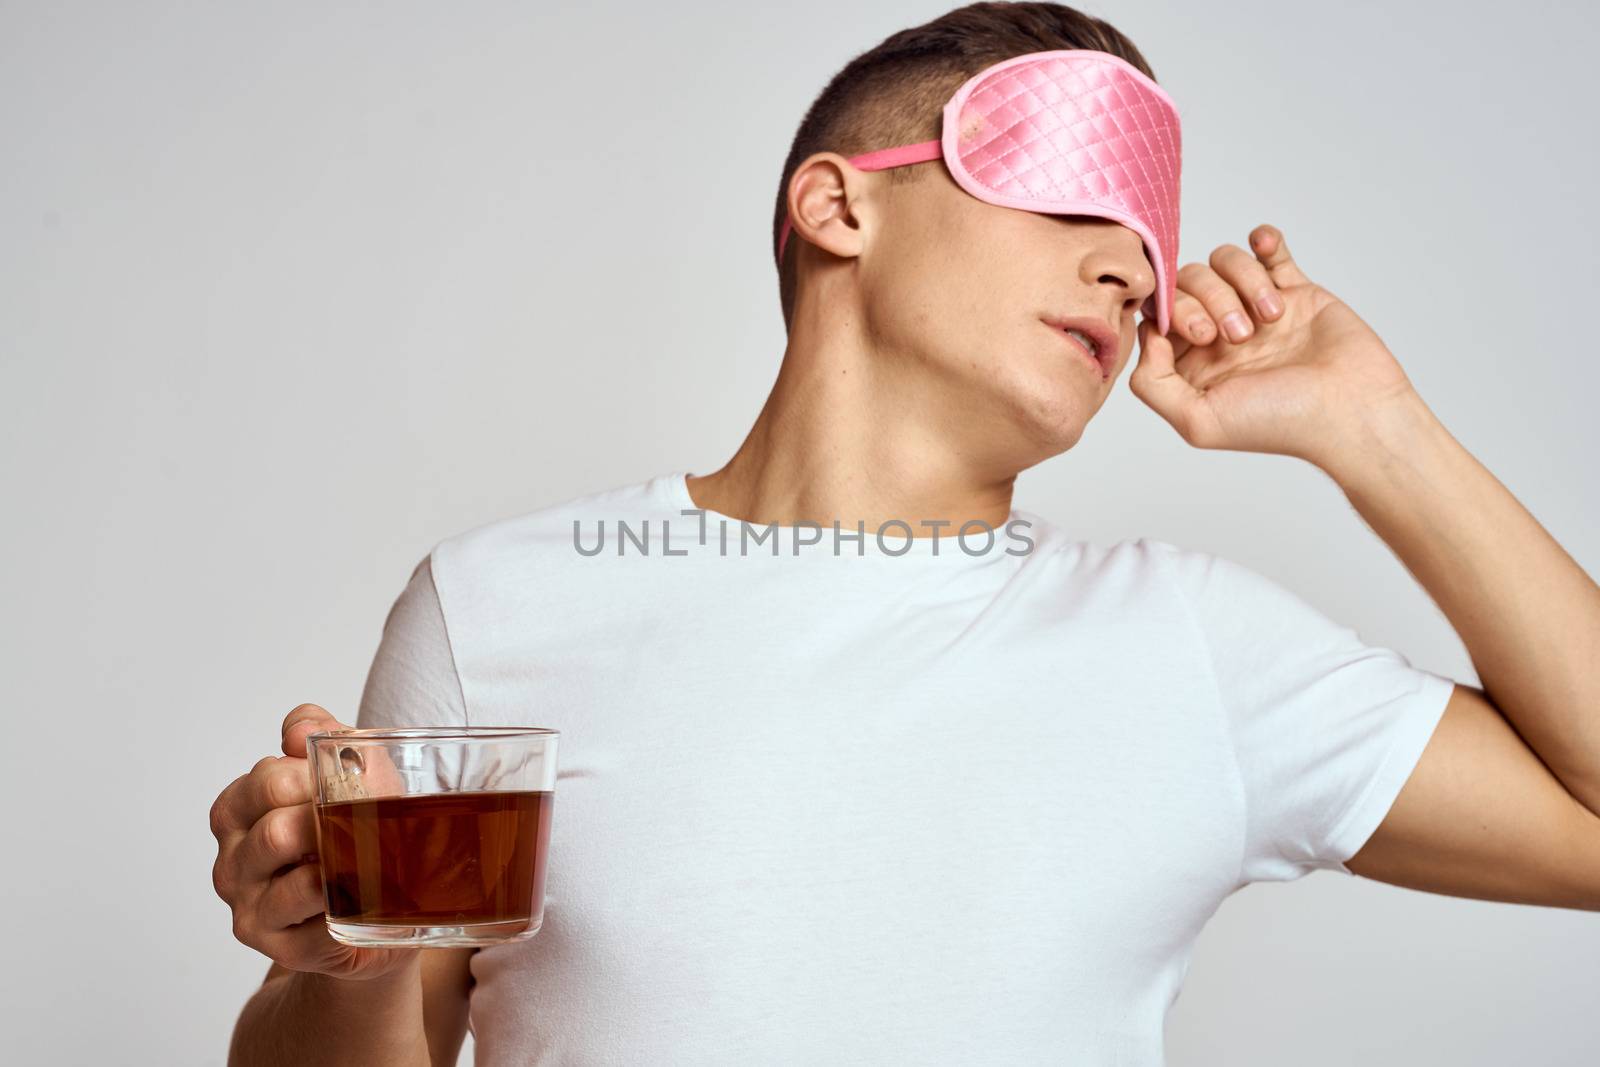 handsome man with pink sleep mask and with a cup of tea in hand pulls himself up on a light background by SHOTPRIME